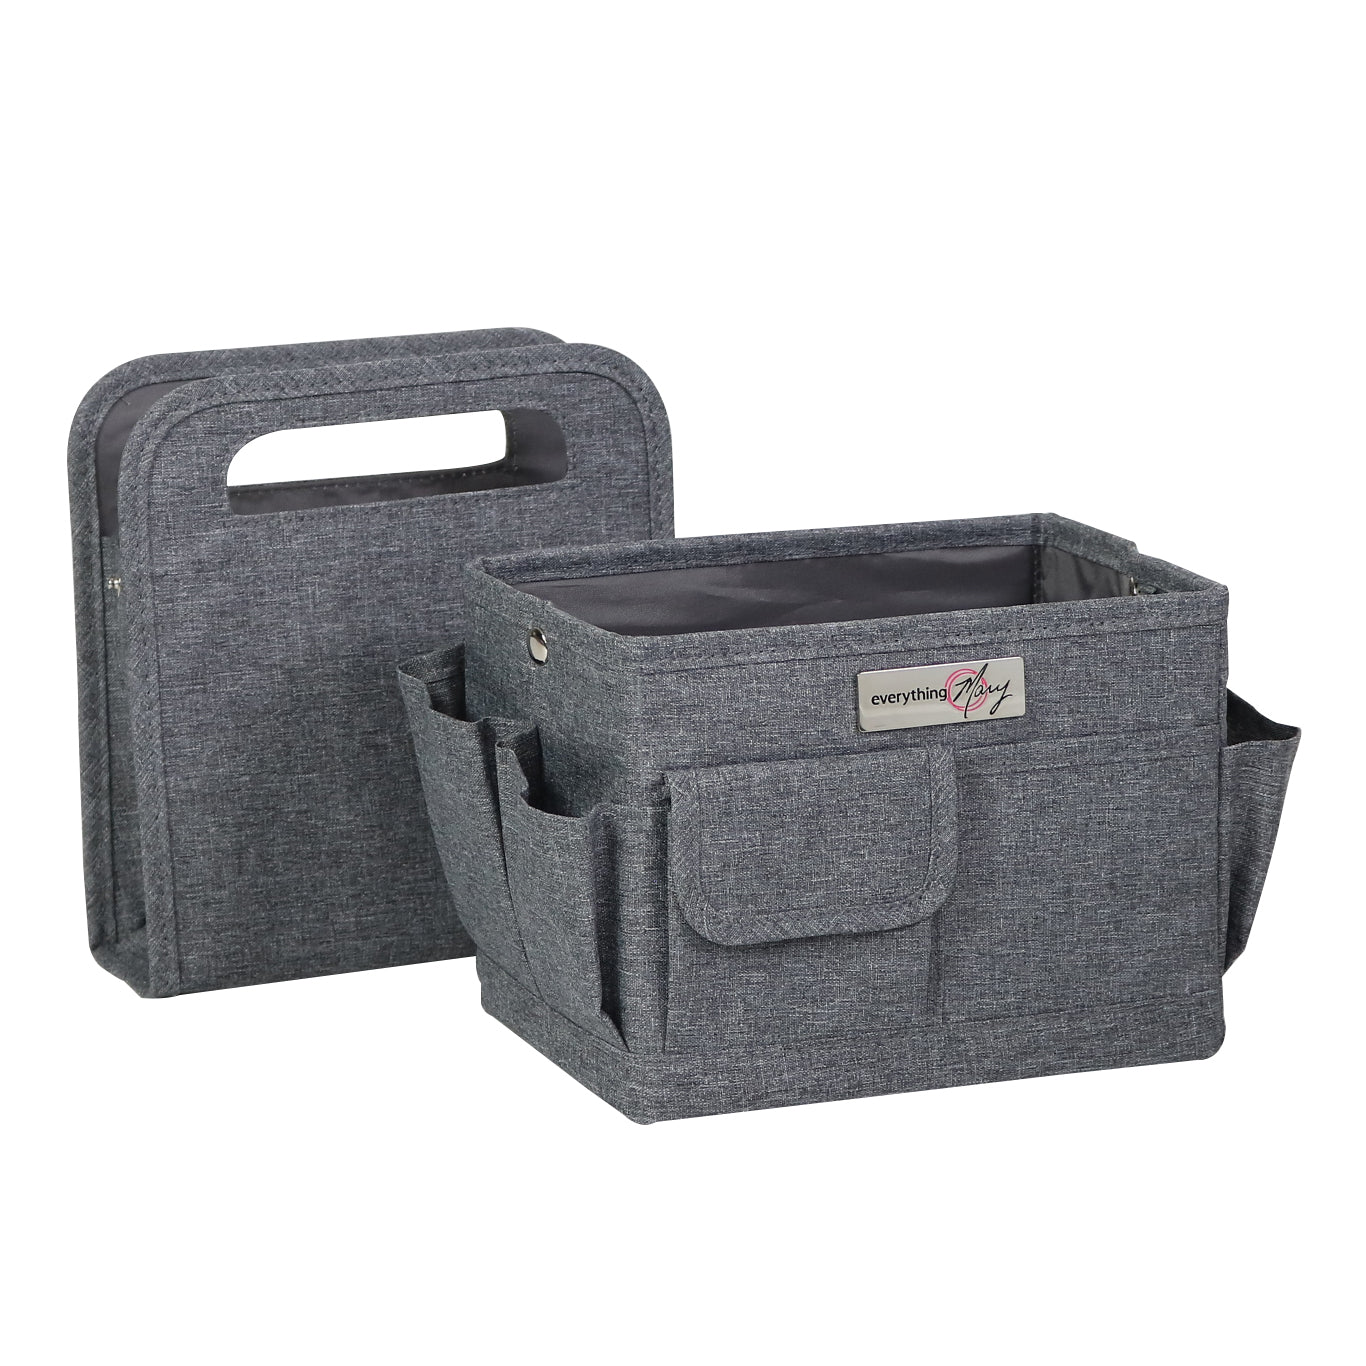 Collapsible Desktop Craft Caddy, Grey Heather - Everything Mary